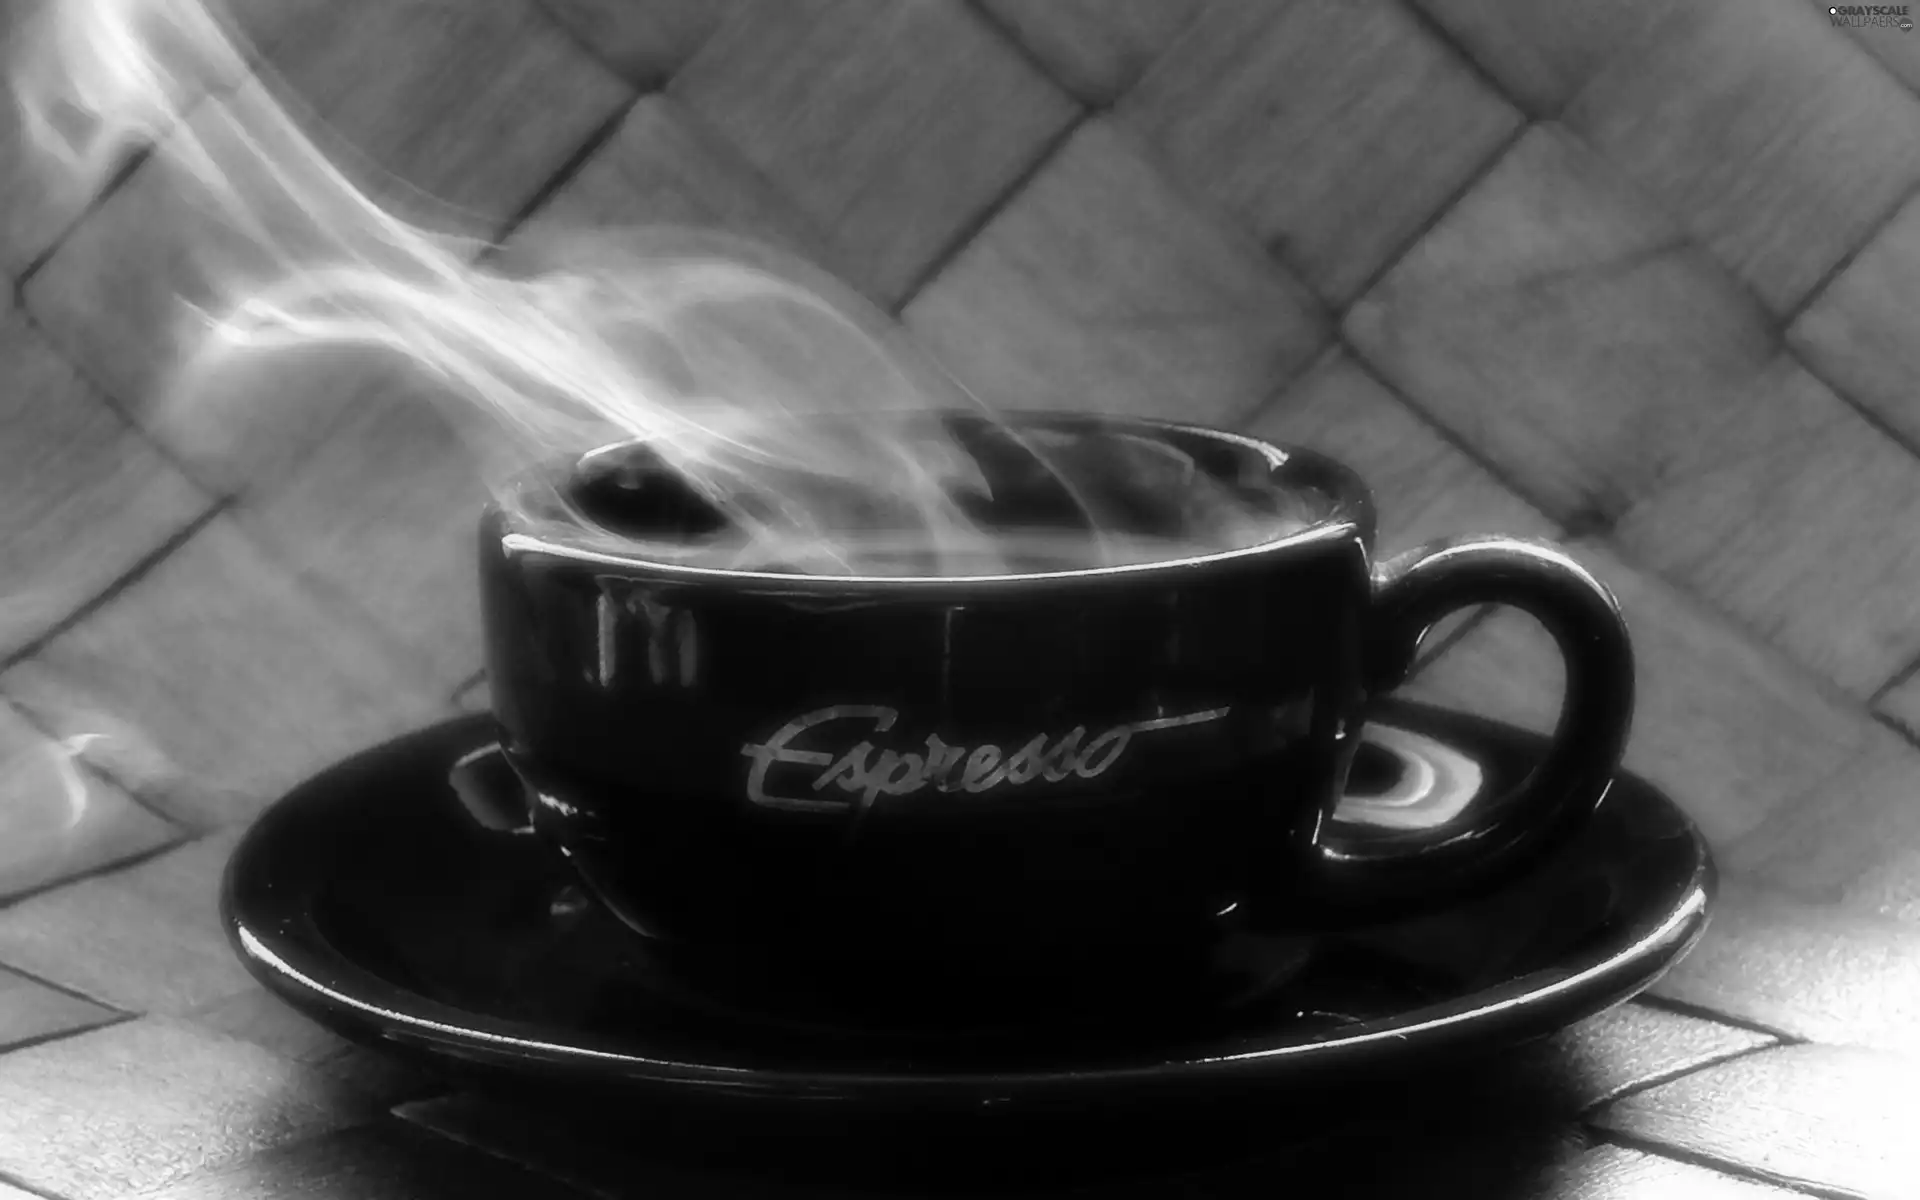 Espresso, Steaming, cup